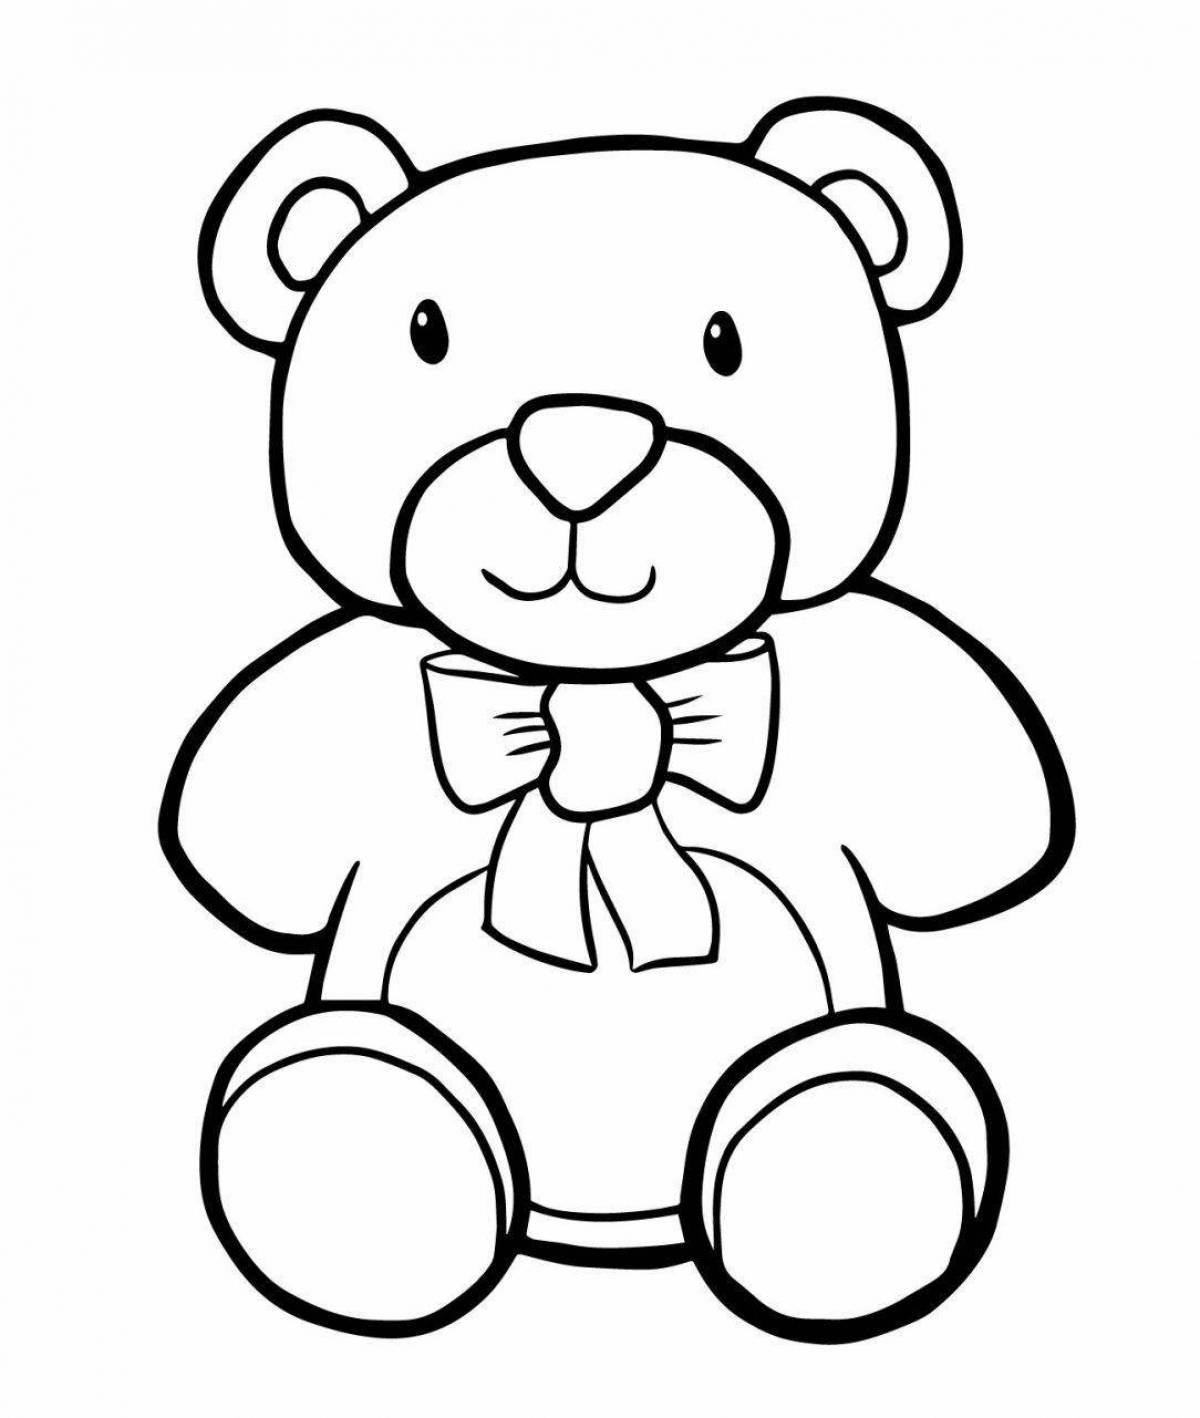 Coloured bear for children 4-5 years old